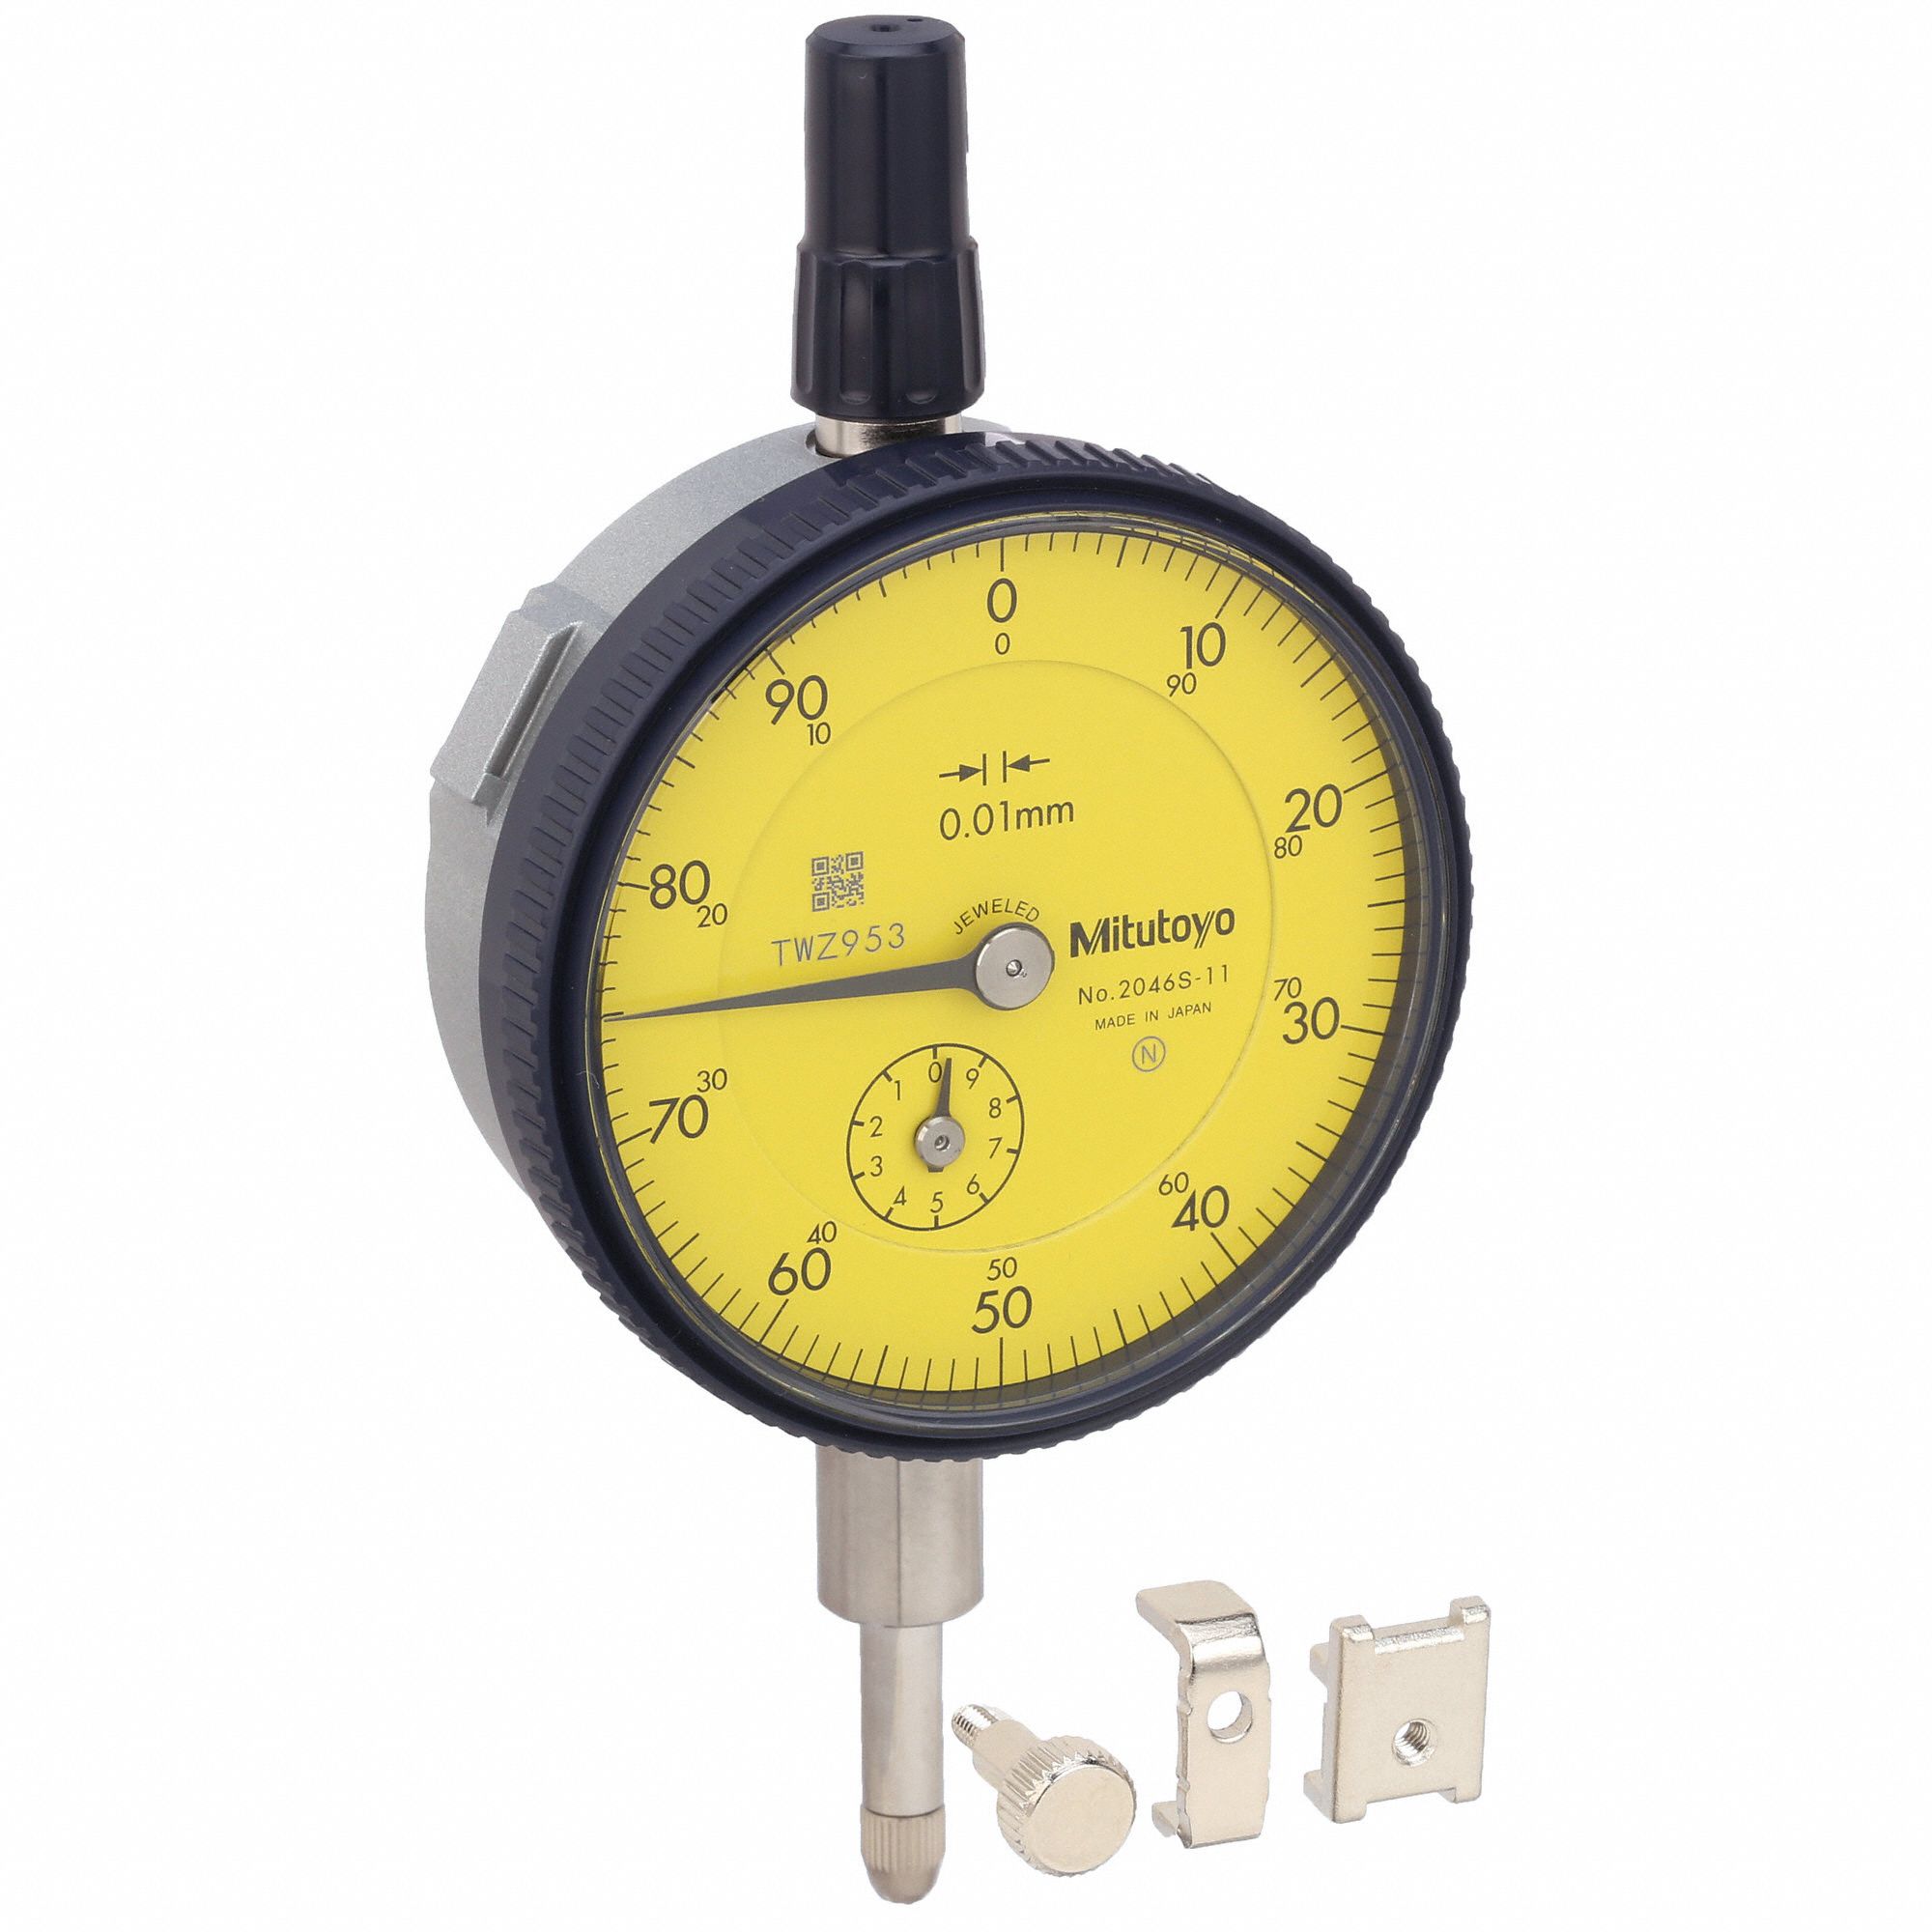 0-10MM Precision Outer Measuring Metric Test Dial Gauge Indicator DTI C #16Y 